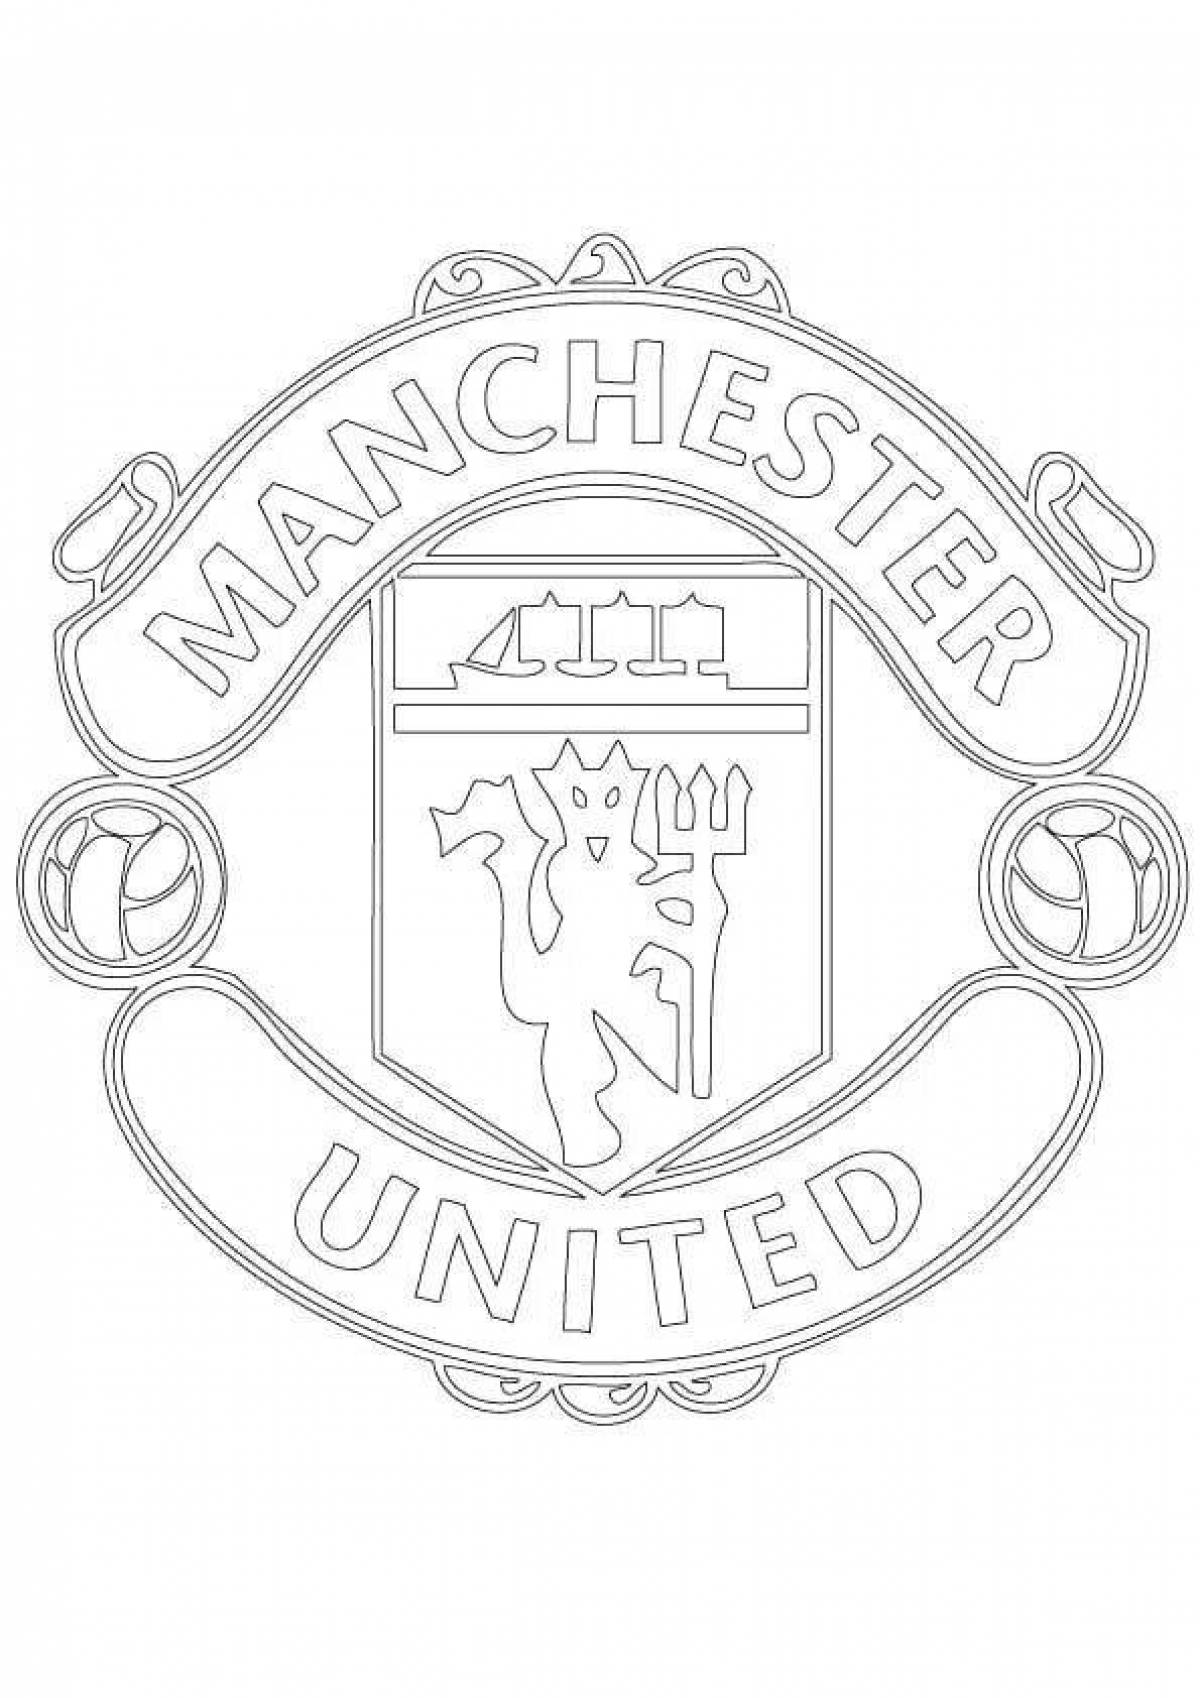 Fabulous coloring pages with football club emblems